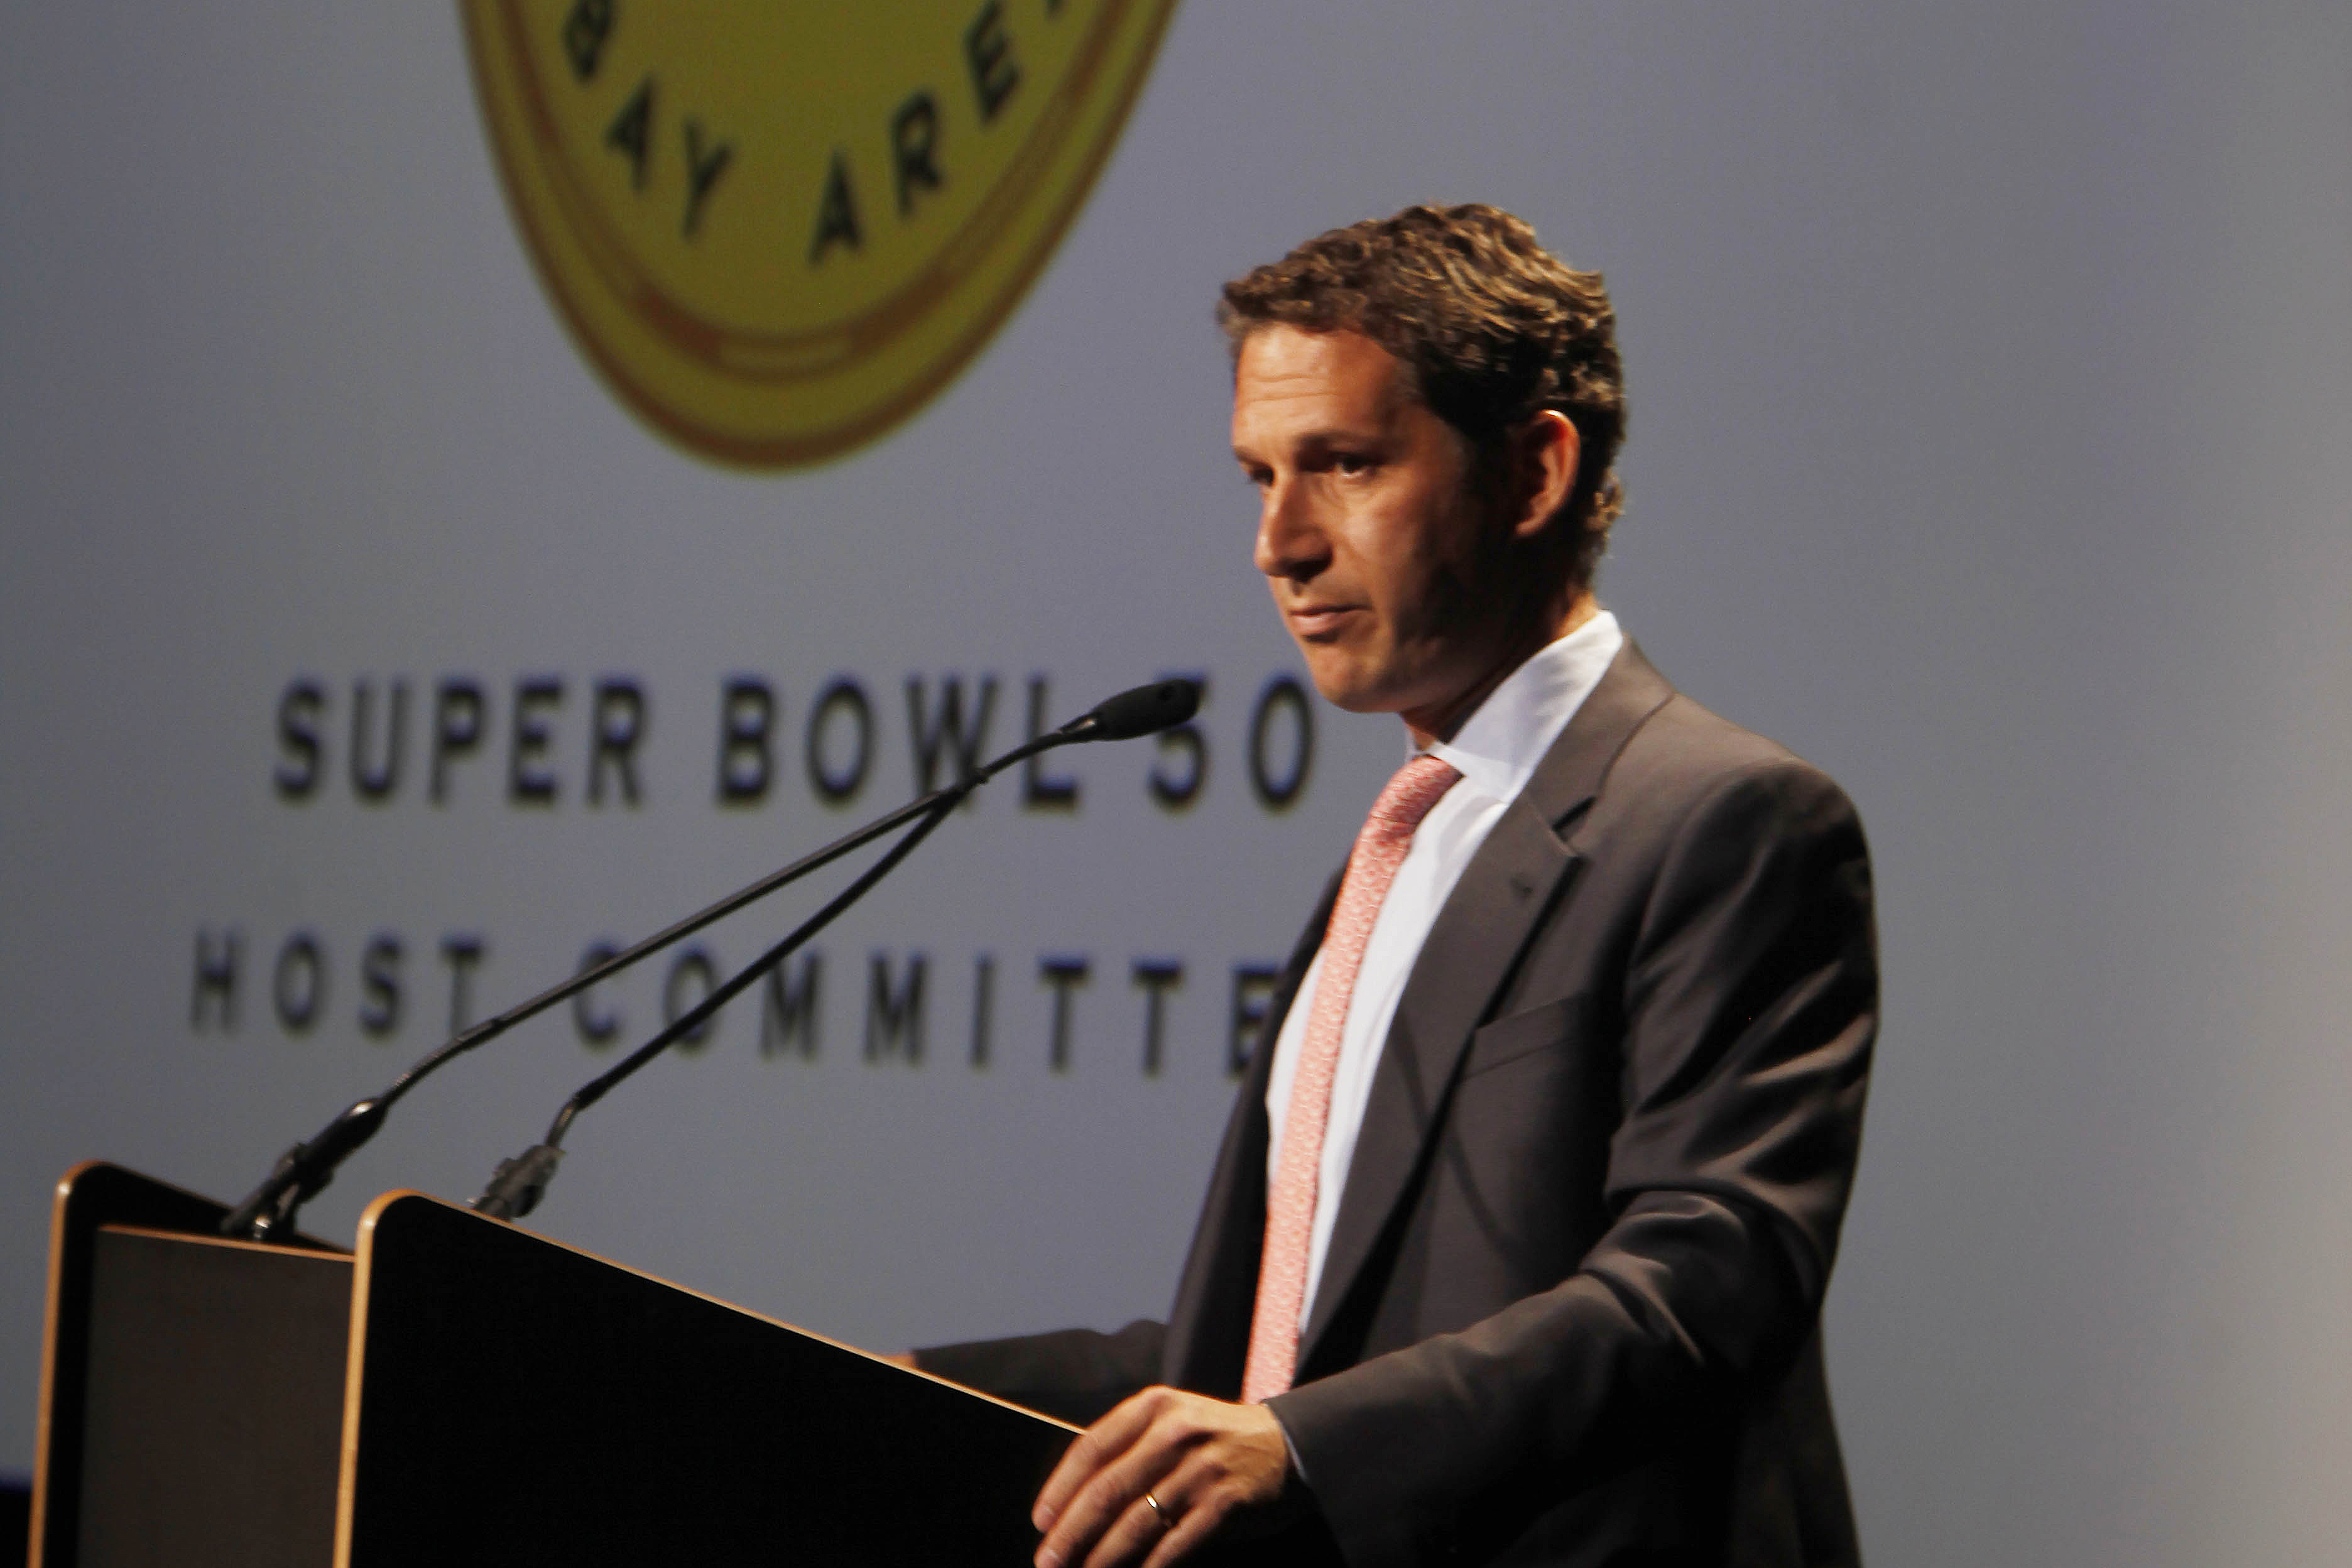 A man in a suit speaks at a podium with the "Super Bowl 50 Host Committee" logo in the background.